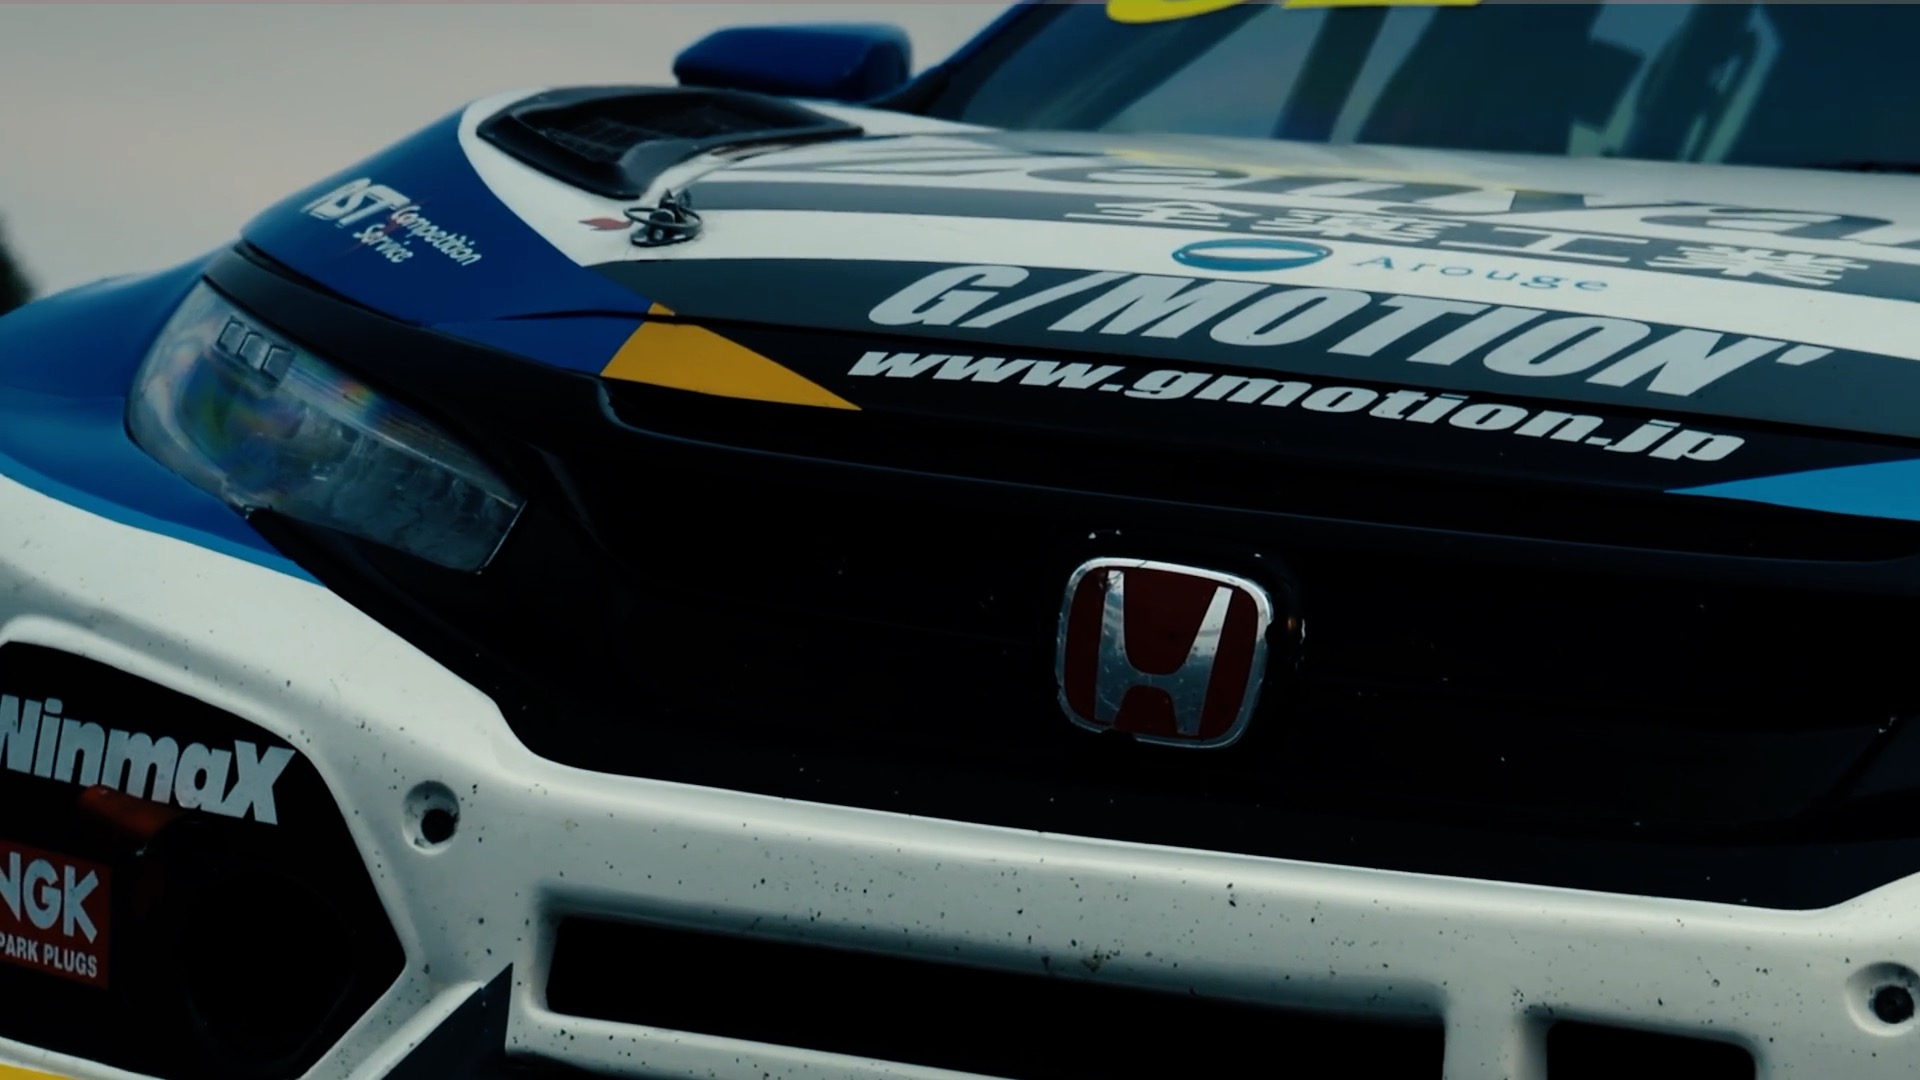 Team G/MOTION’ TCR-JAPAN honda civic TCR  | The charm of fighting machines | 1st Festa, The films nominated.